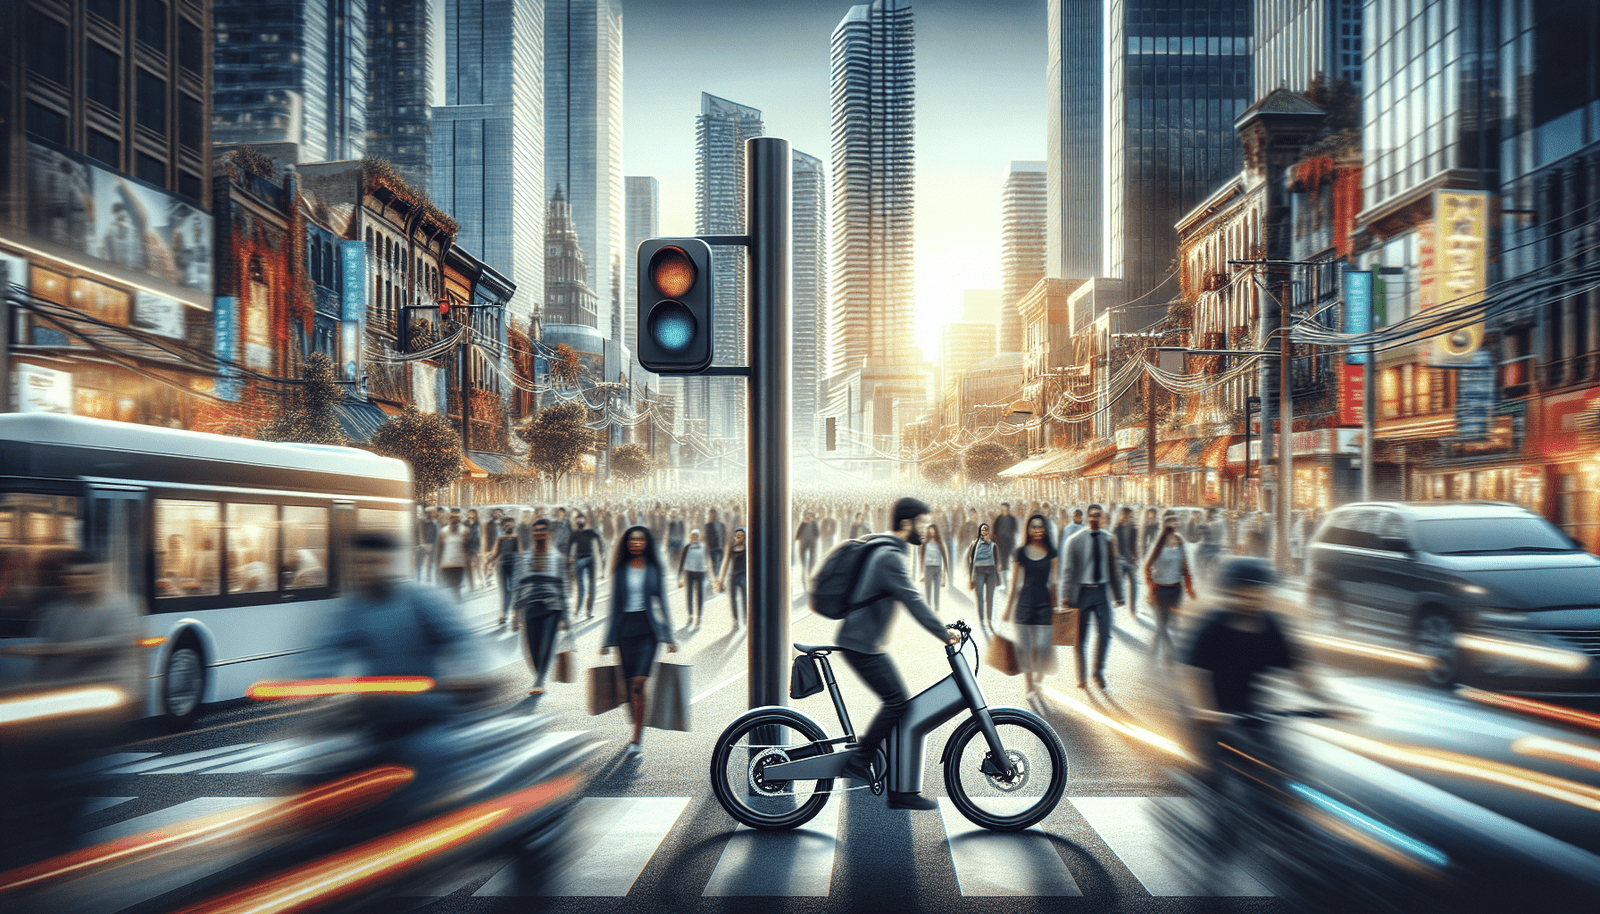 How Do Electric Bikes Handle In Crowded Urban Environments?